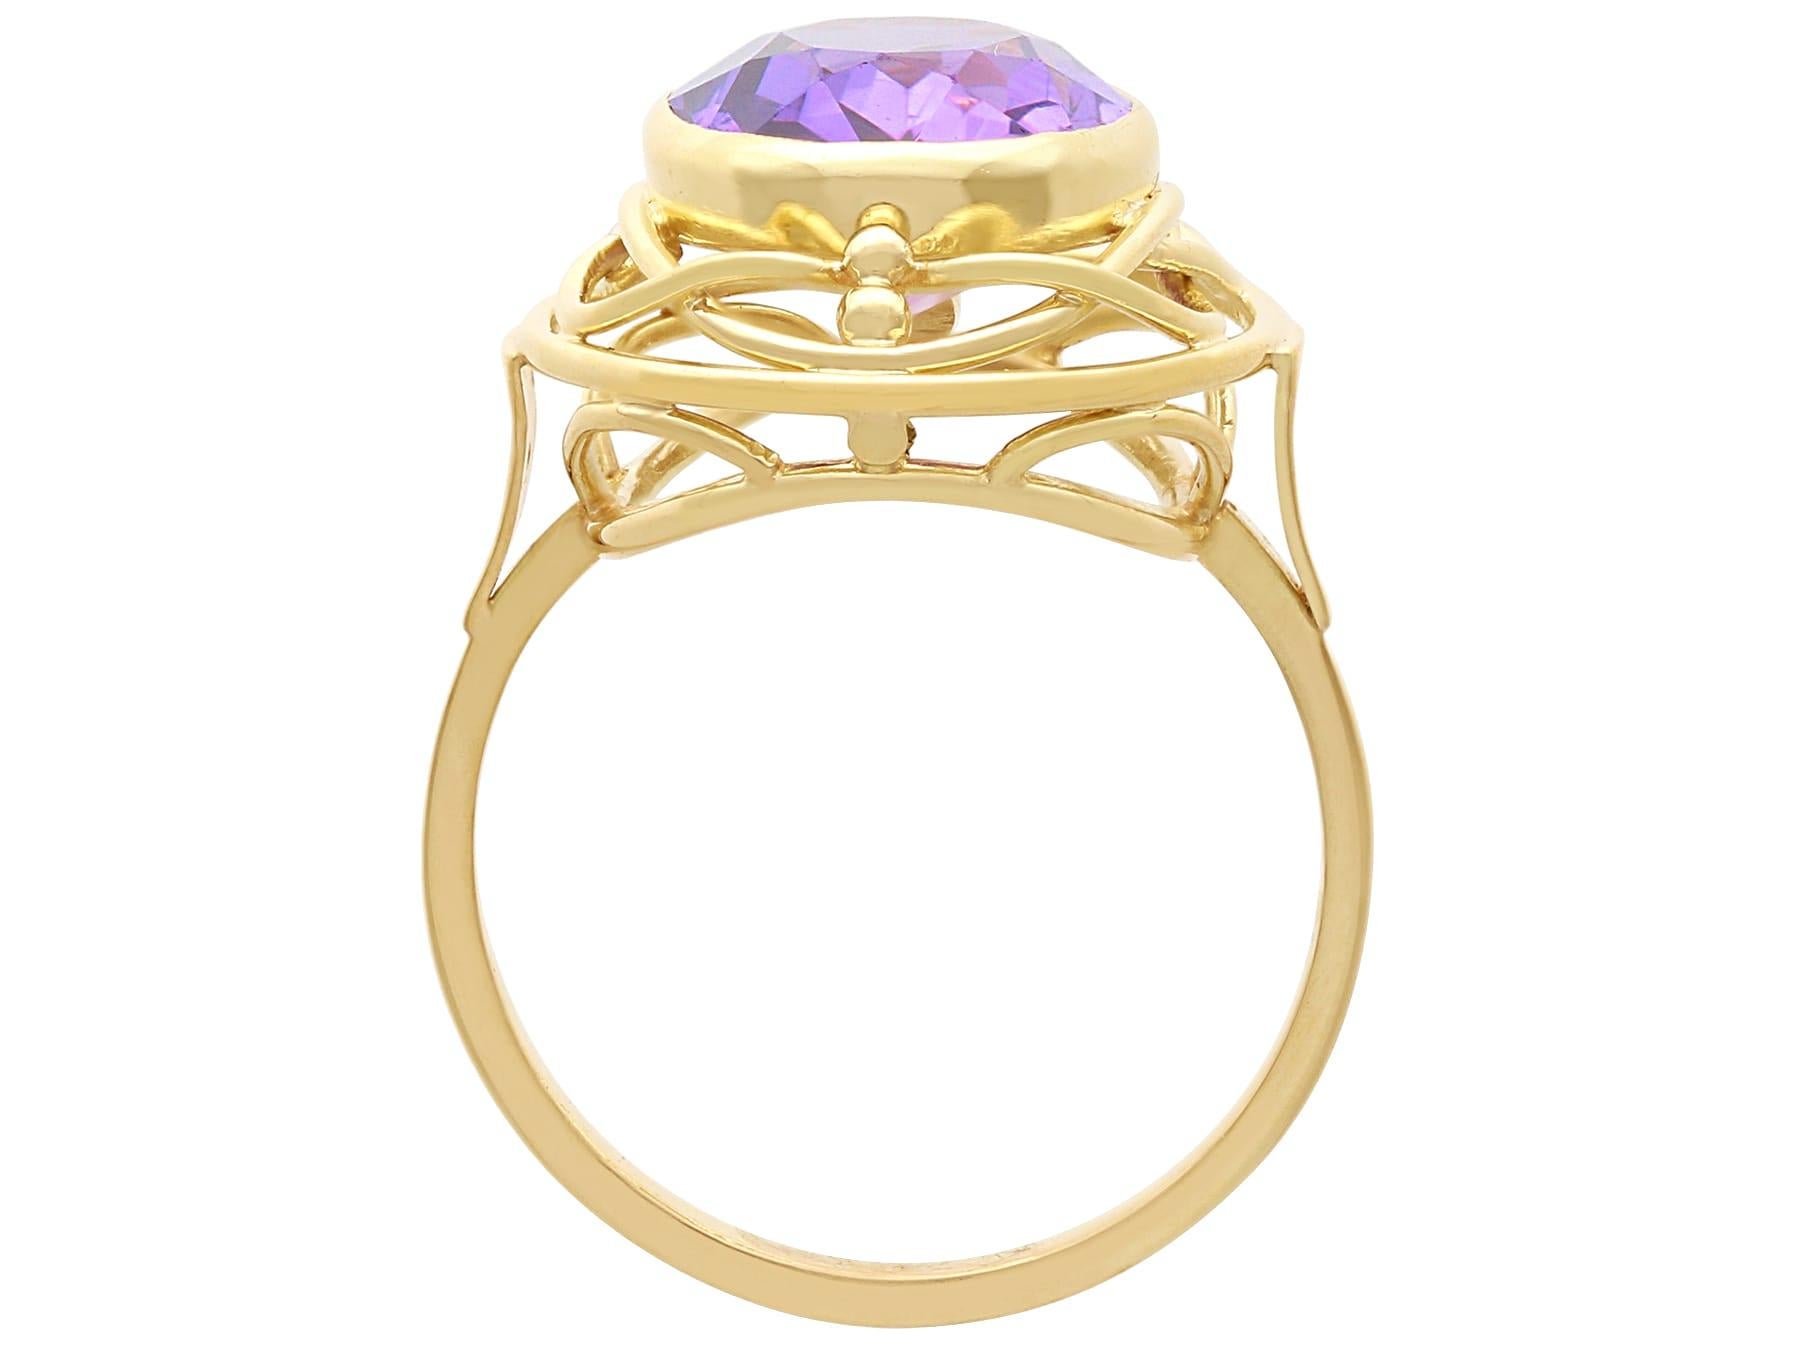 Vintage 6.91Ct Amethyst and 14k Yellow Gold Dress Ring 1940 For Sale 3